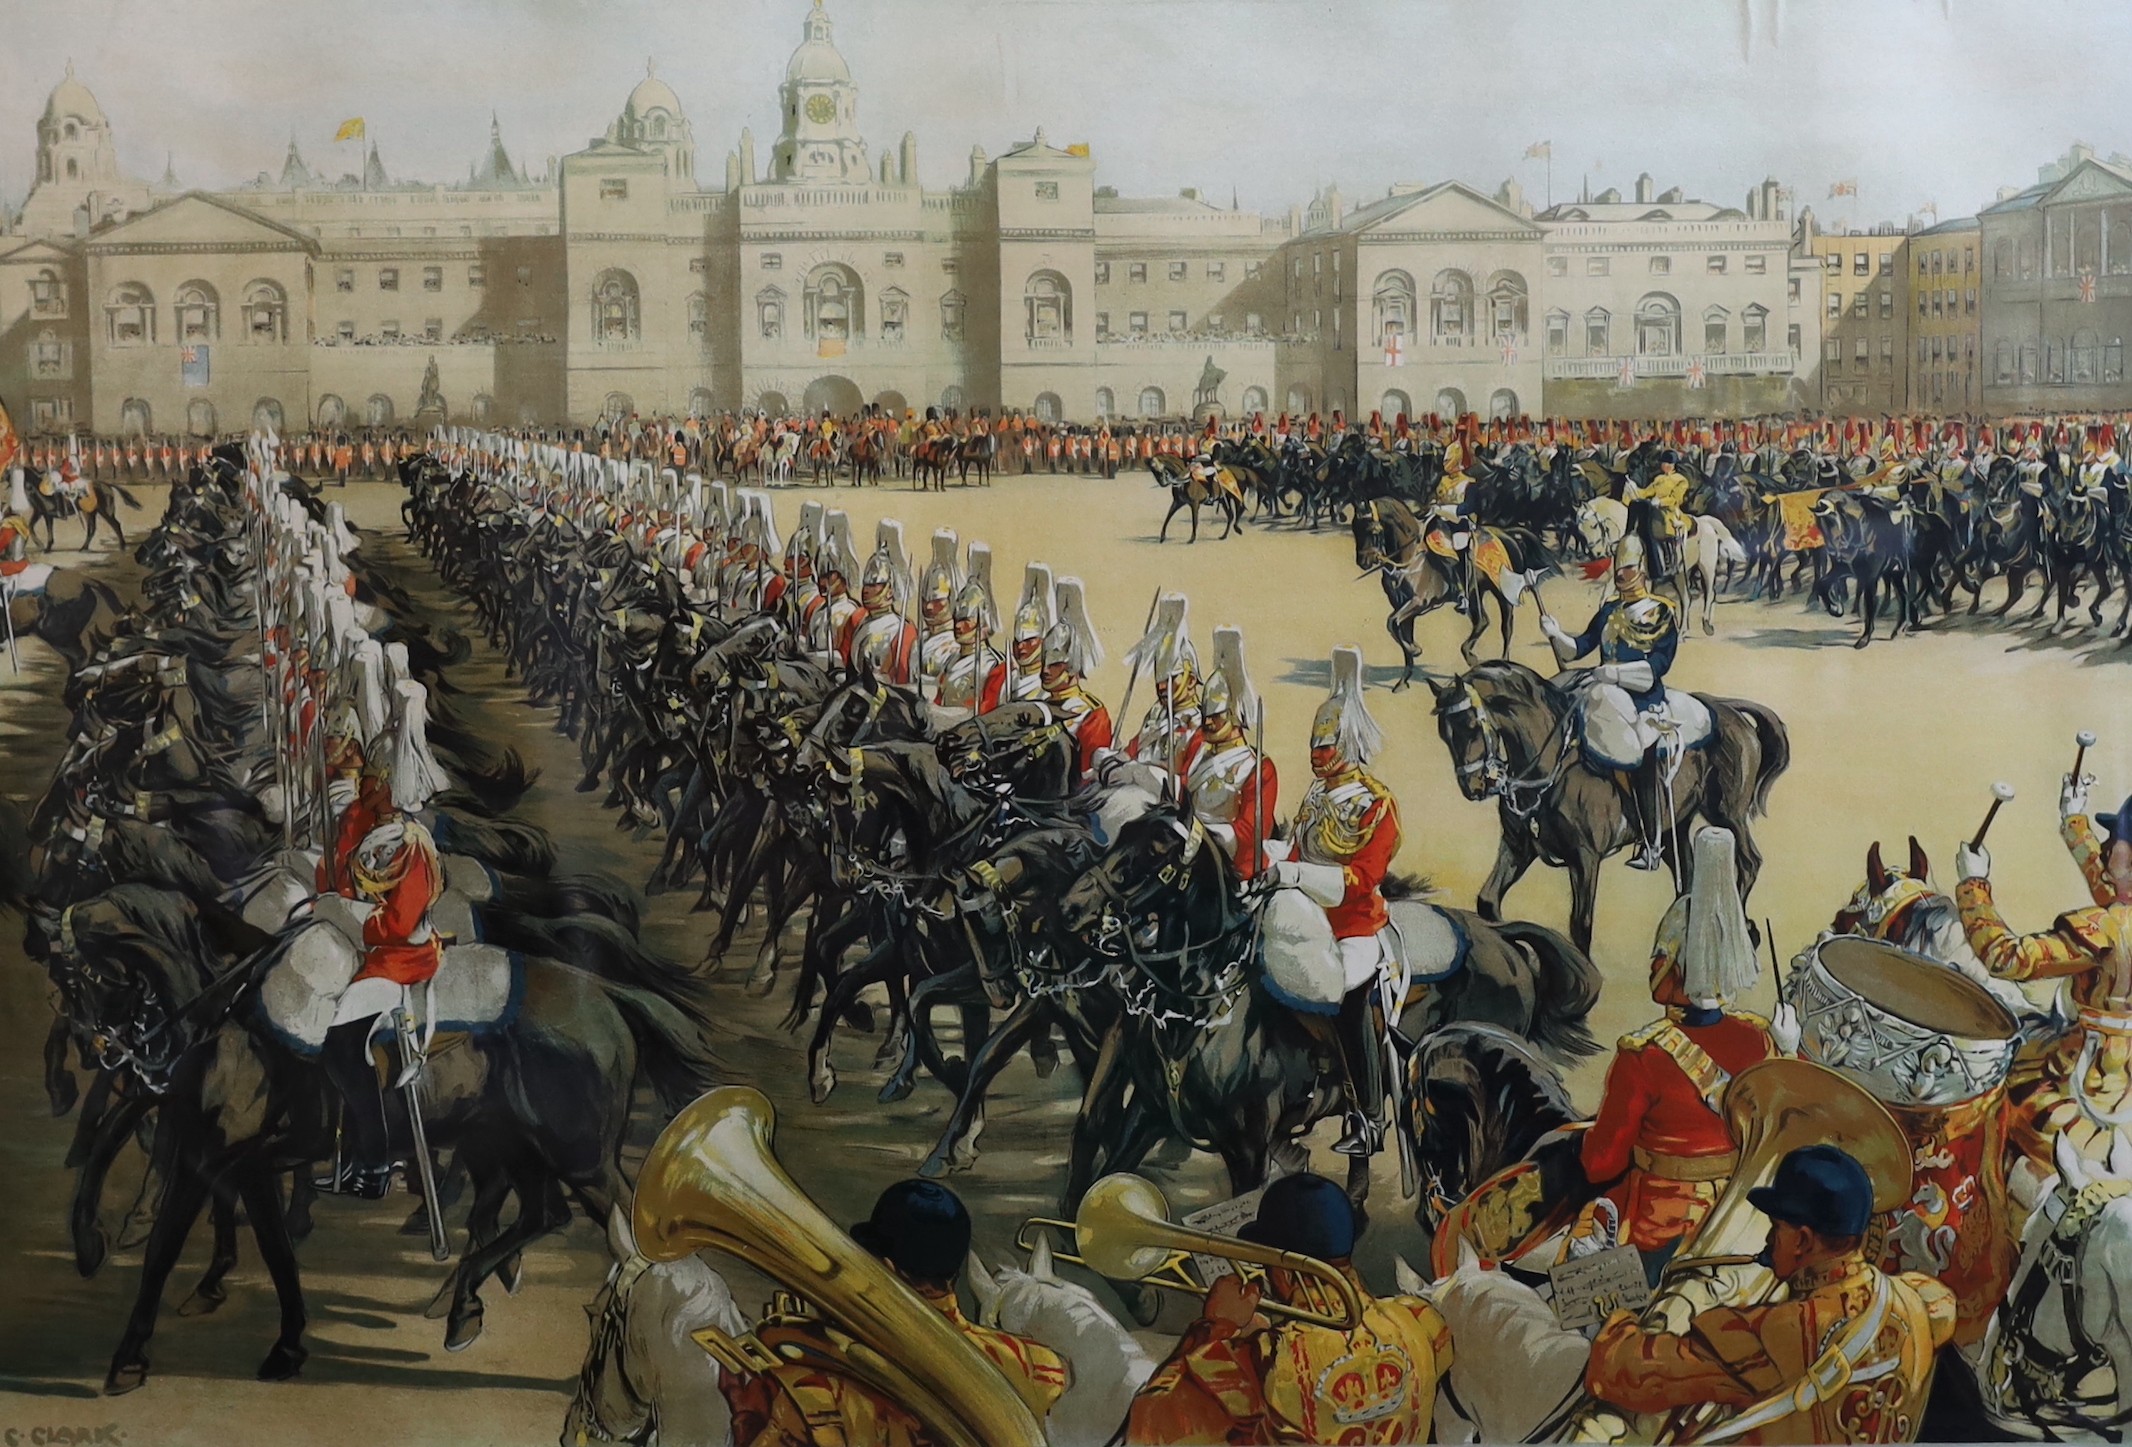 Christopher Clark (1875-1942), 'London by LMS, Trooping The Colour, Whitehall', RA Series 79, lithograph in colours, 102 x 126cm